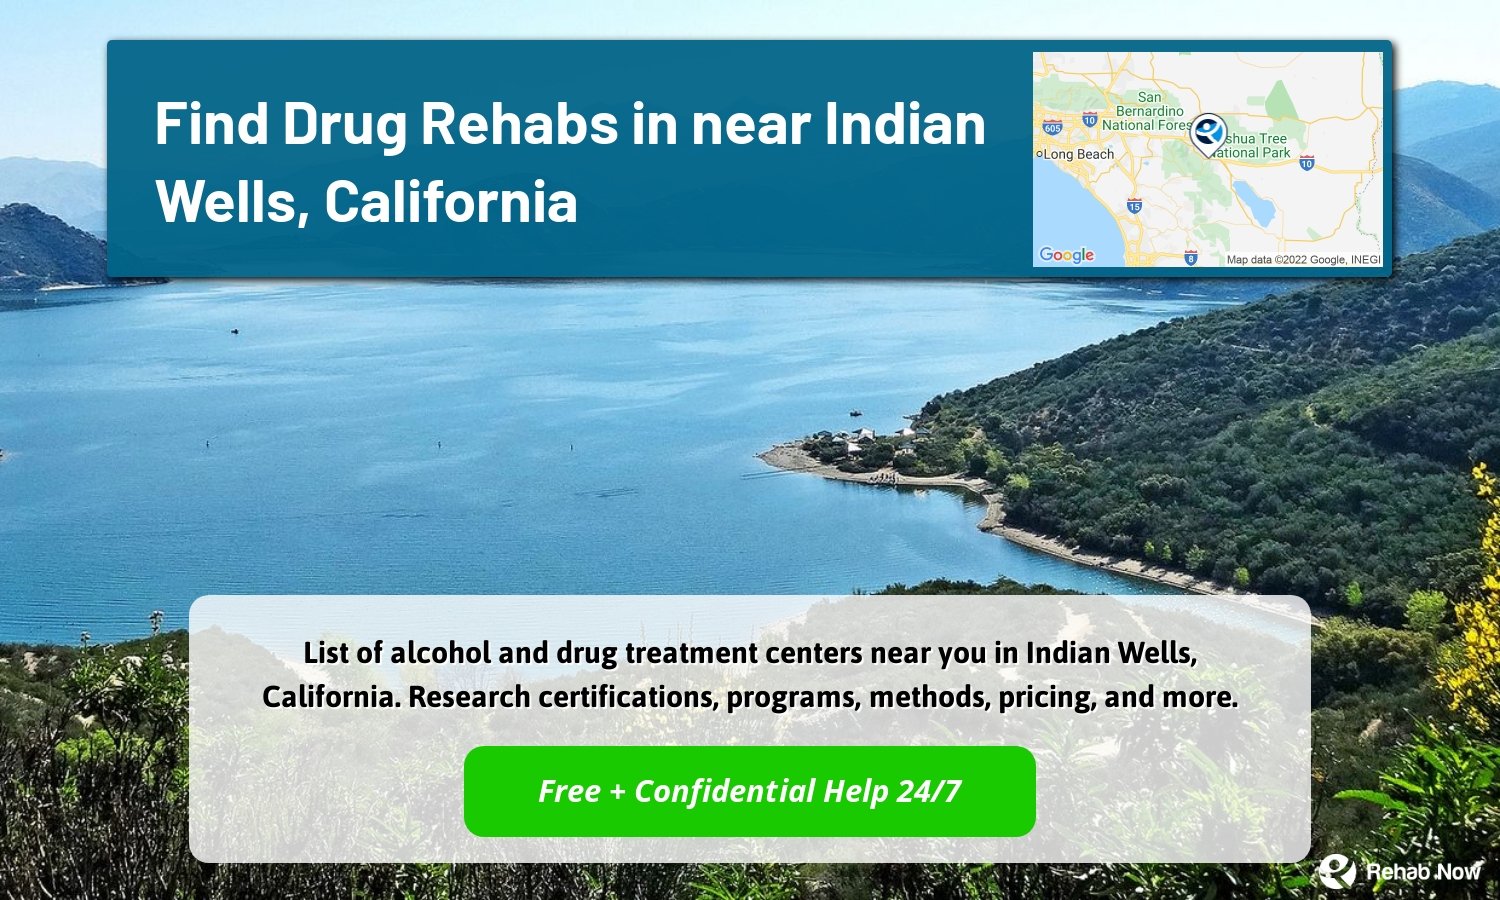 List of alcohol and drug treatment centers near you in Indian Wells, California. Research certifications, programs, methods, pricing, and more.